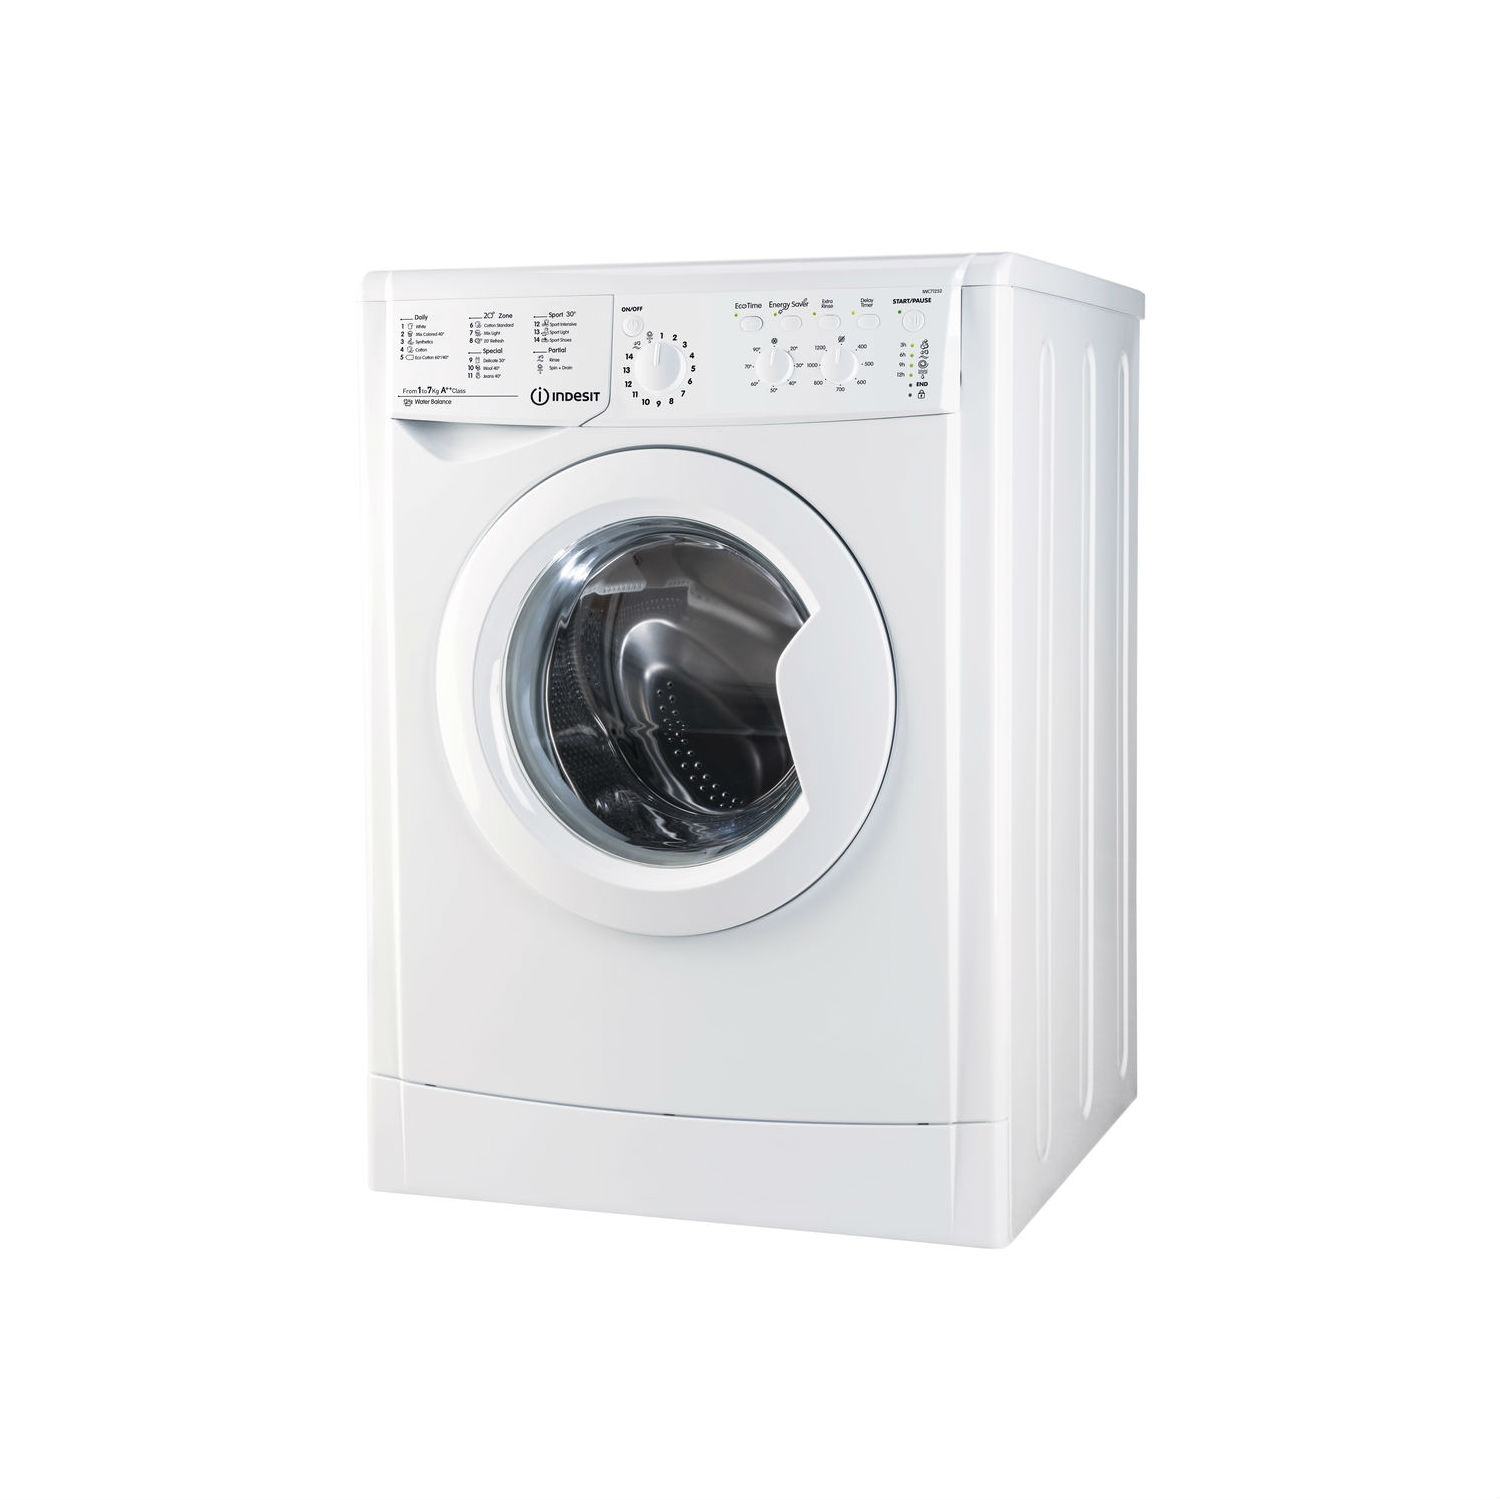 Indesit 7kg 1200 Spin Washing Machine - White - A++ Energy Rated - 0